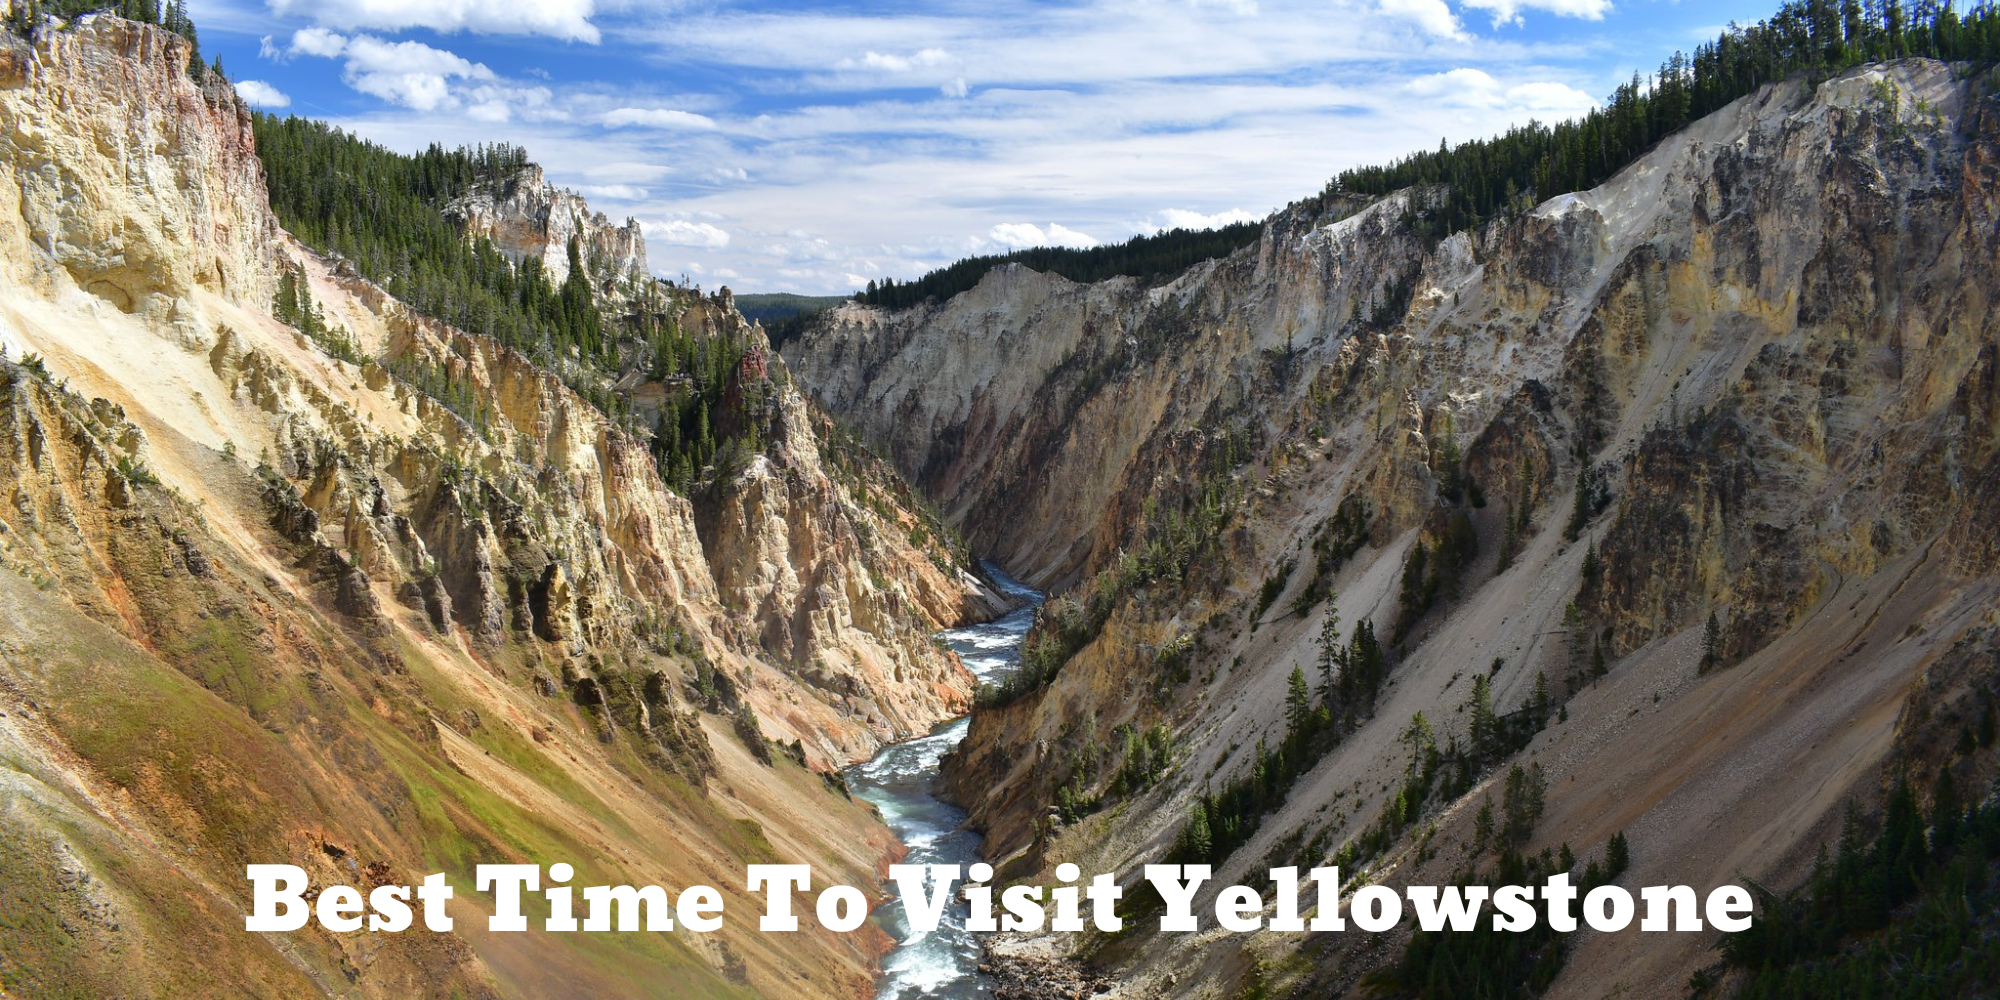 Perfect Time To Visit Yellowstone? This August!